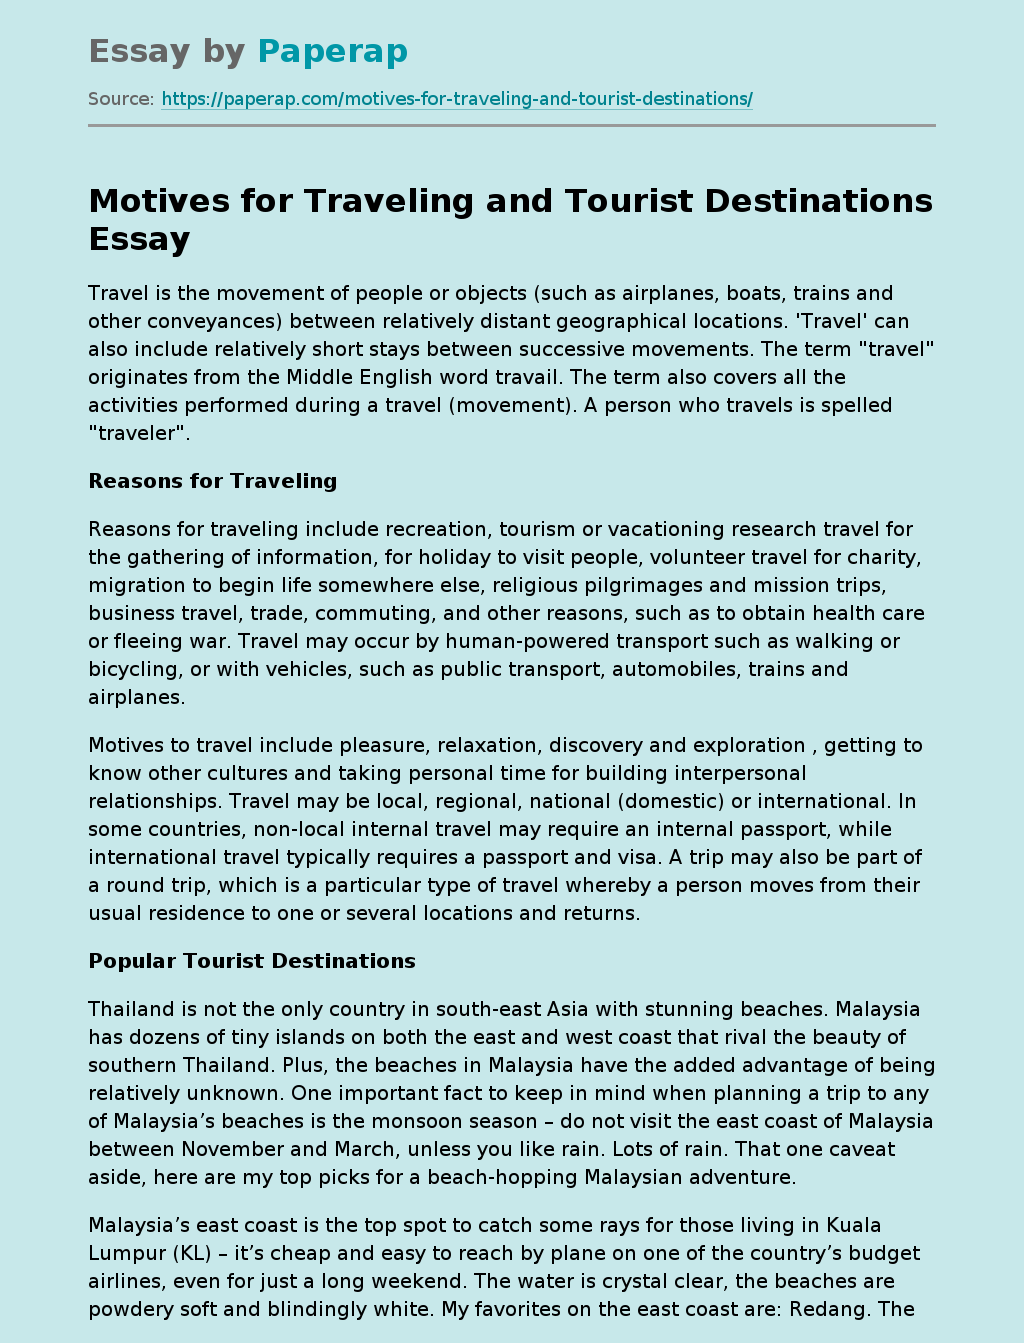 Motives for Traveling and Tourist Destinations